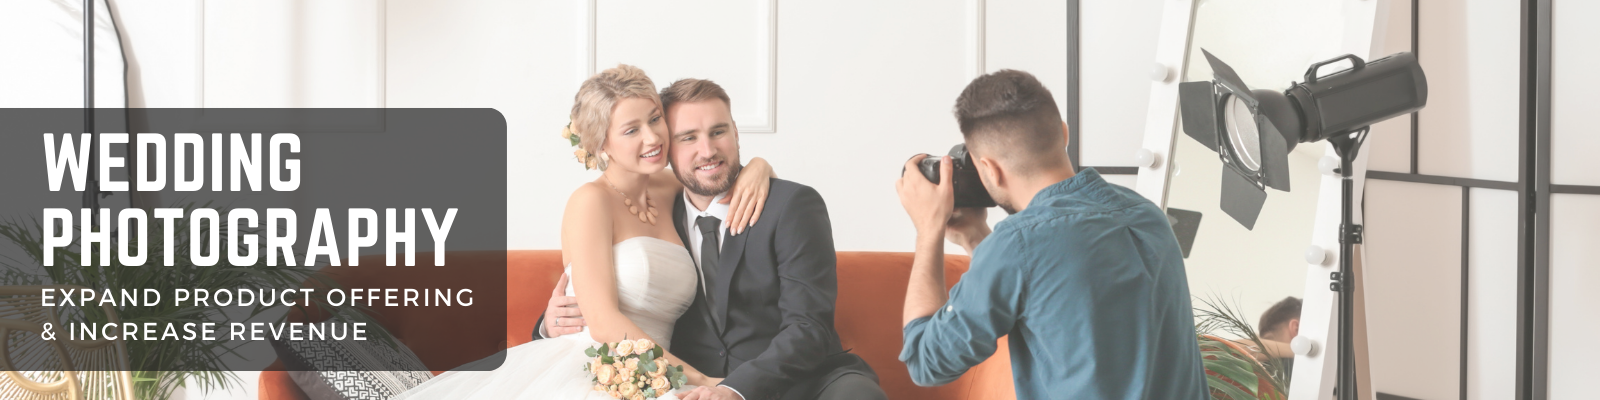 Expanding Photo Product Offering for Wedding Photographers | Annex Photo Toronto